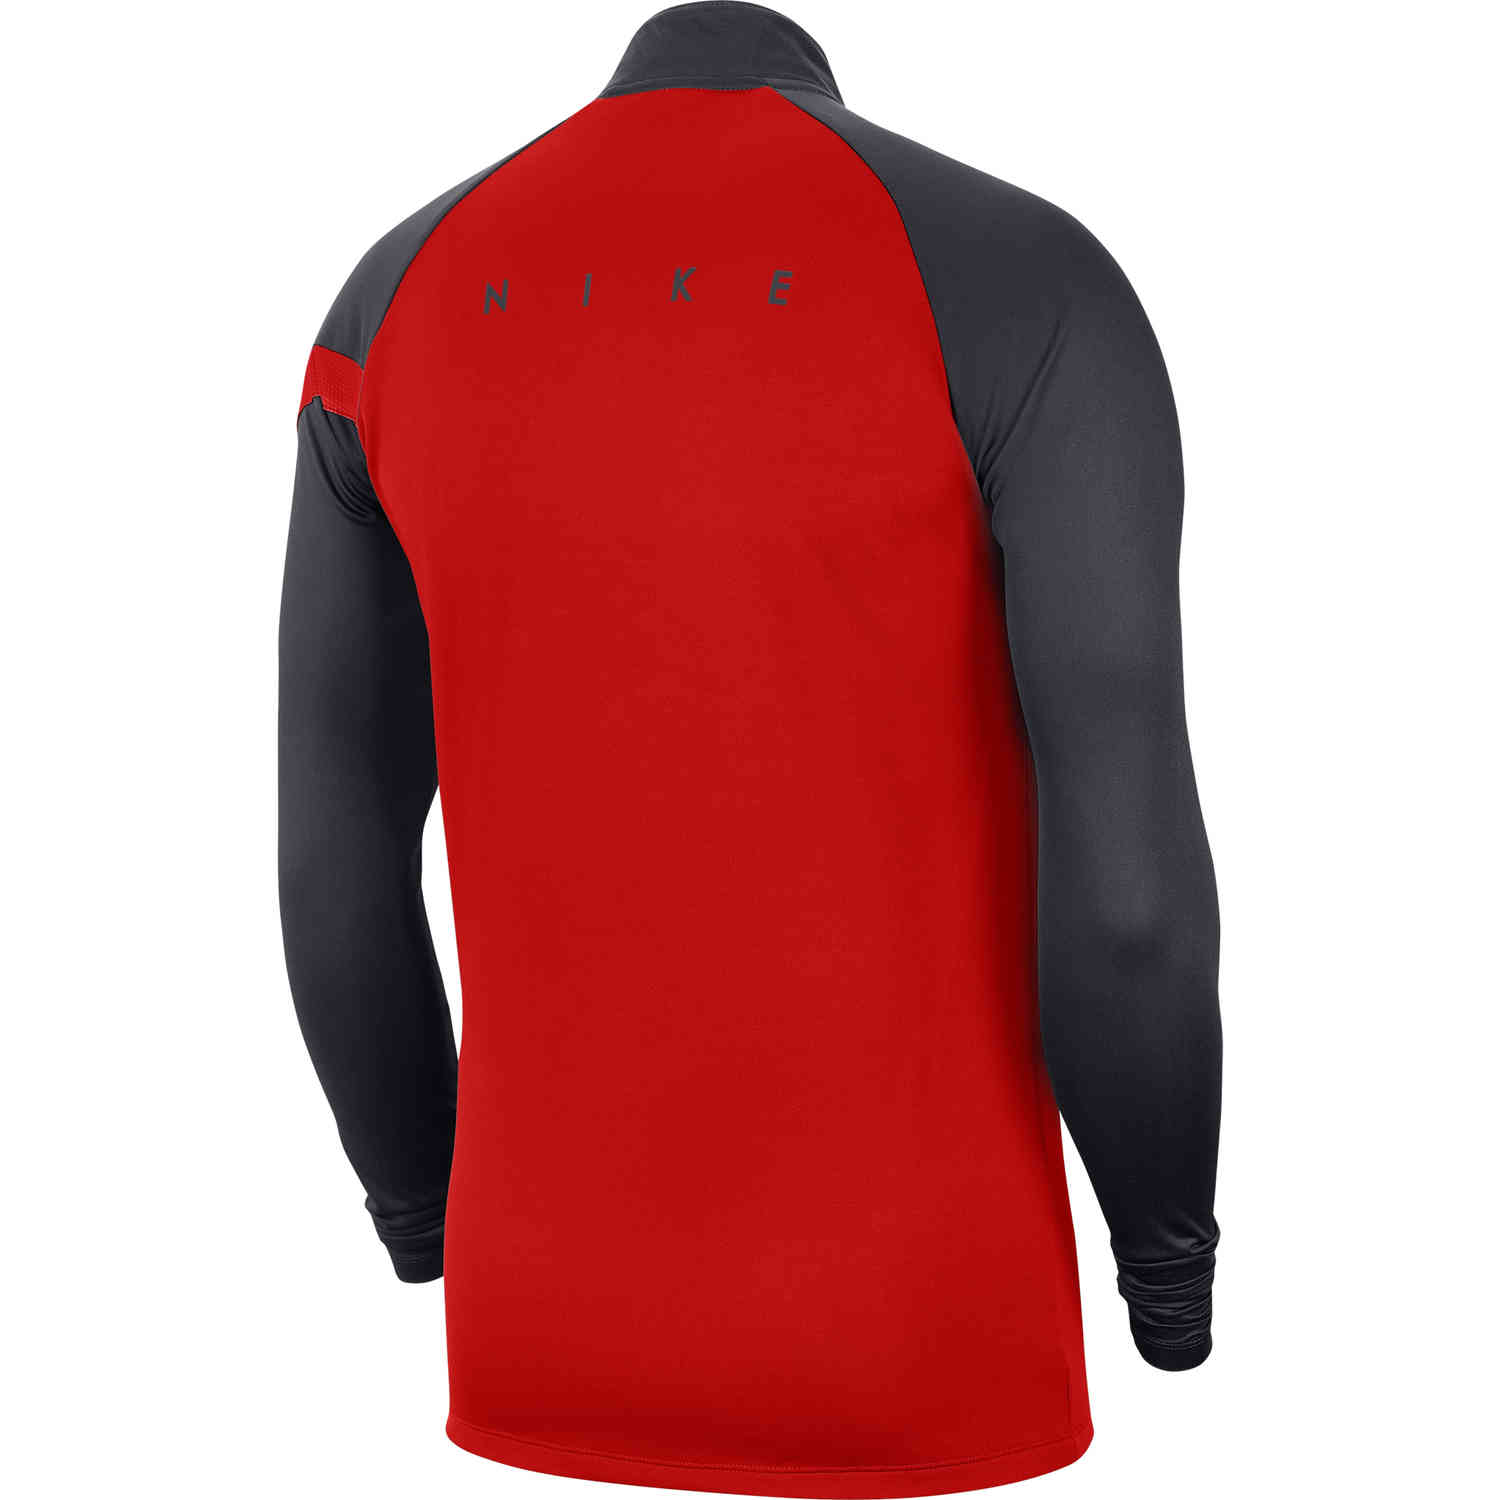 Nike Academy Pro Drill Top - University Red/Anhtracite - SoccerPro